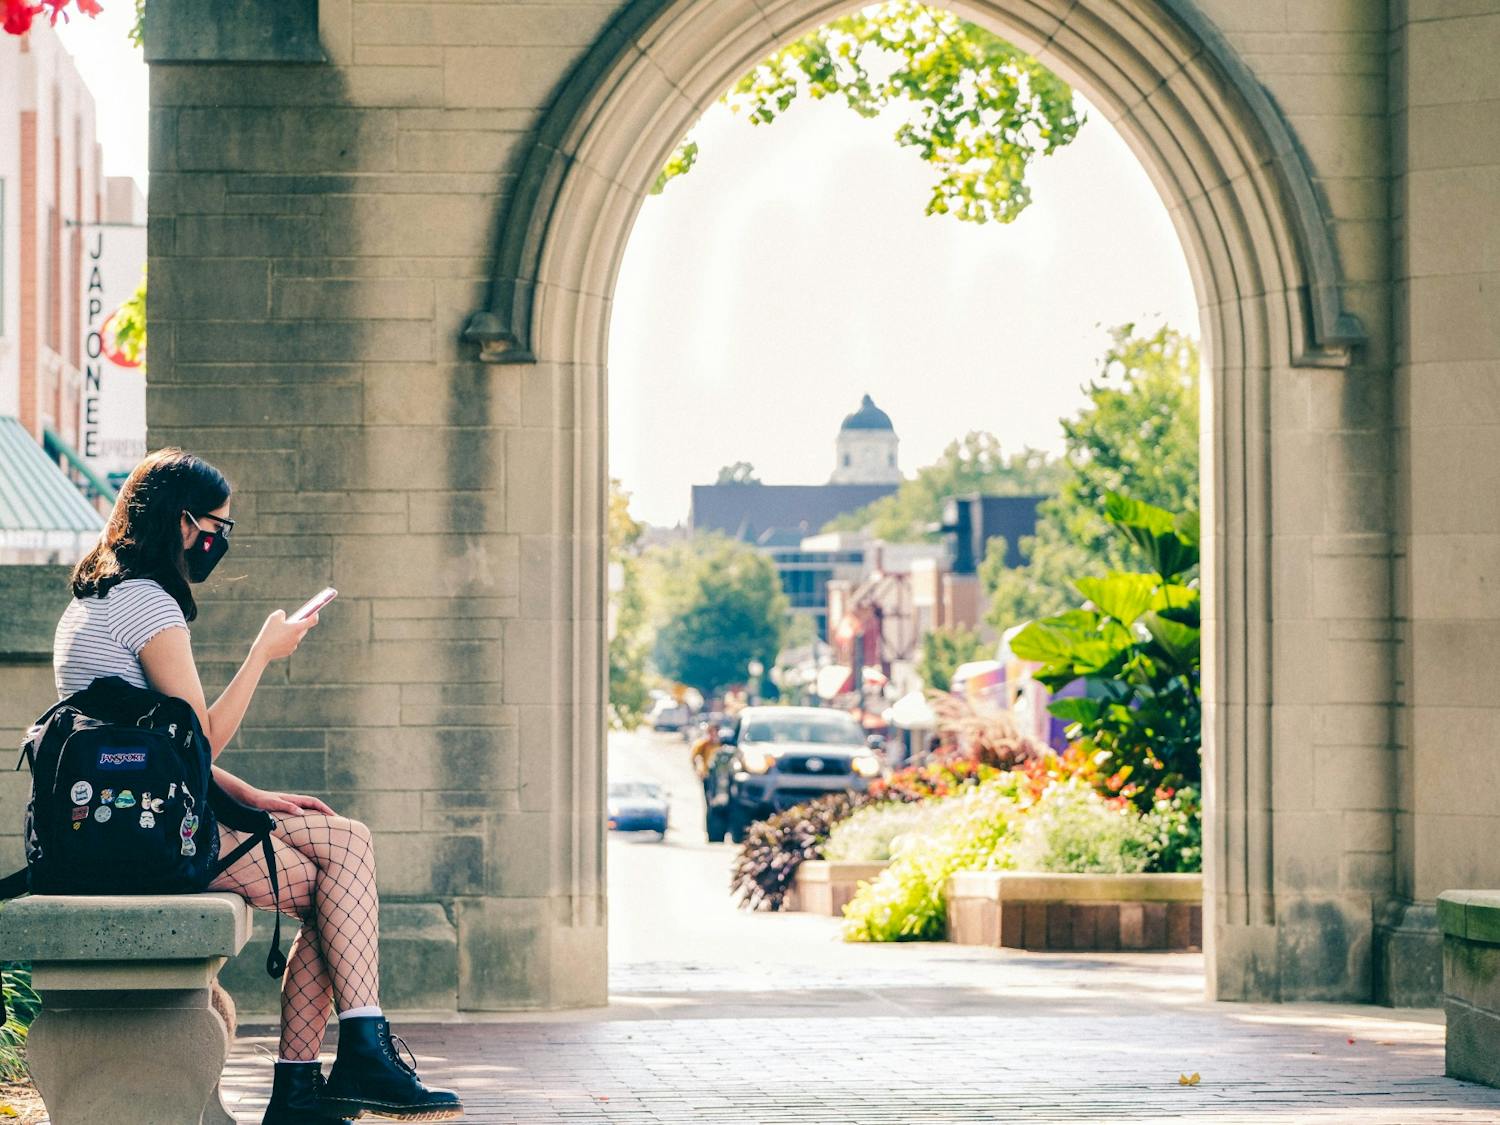 GALLERY: Capturing the start of IU's 2020 fall semester